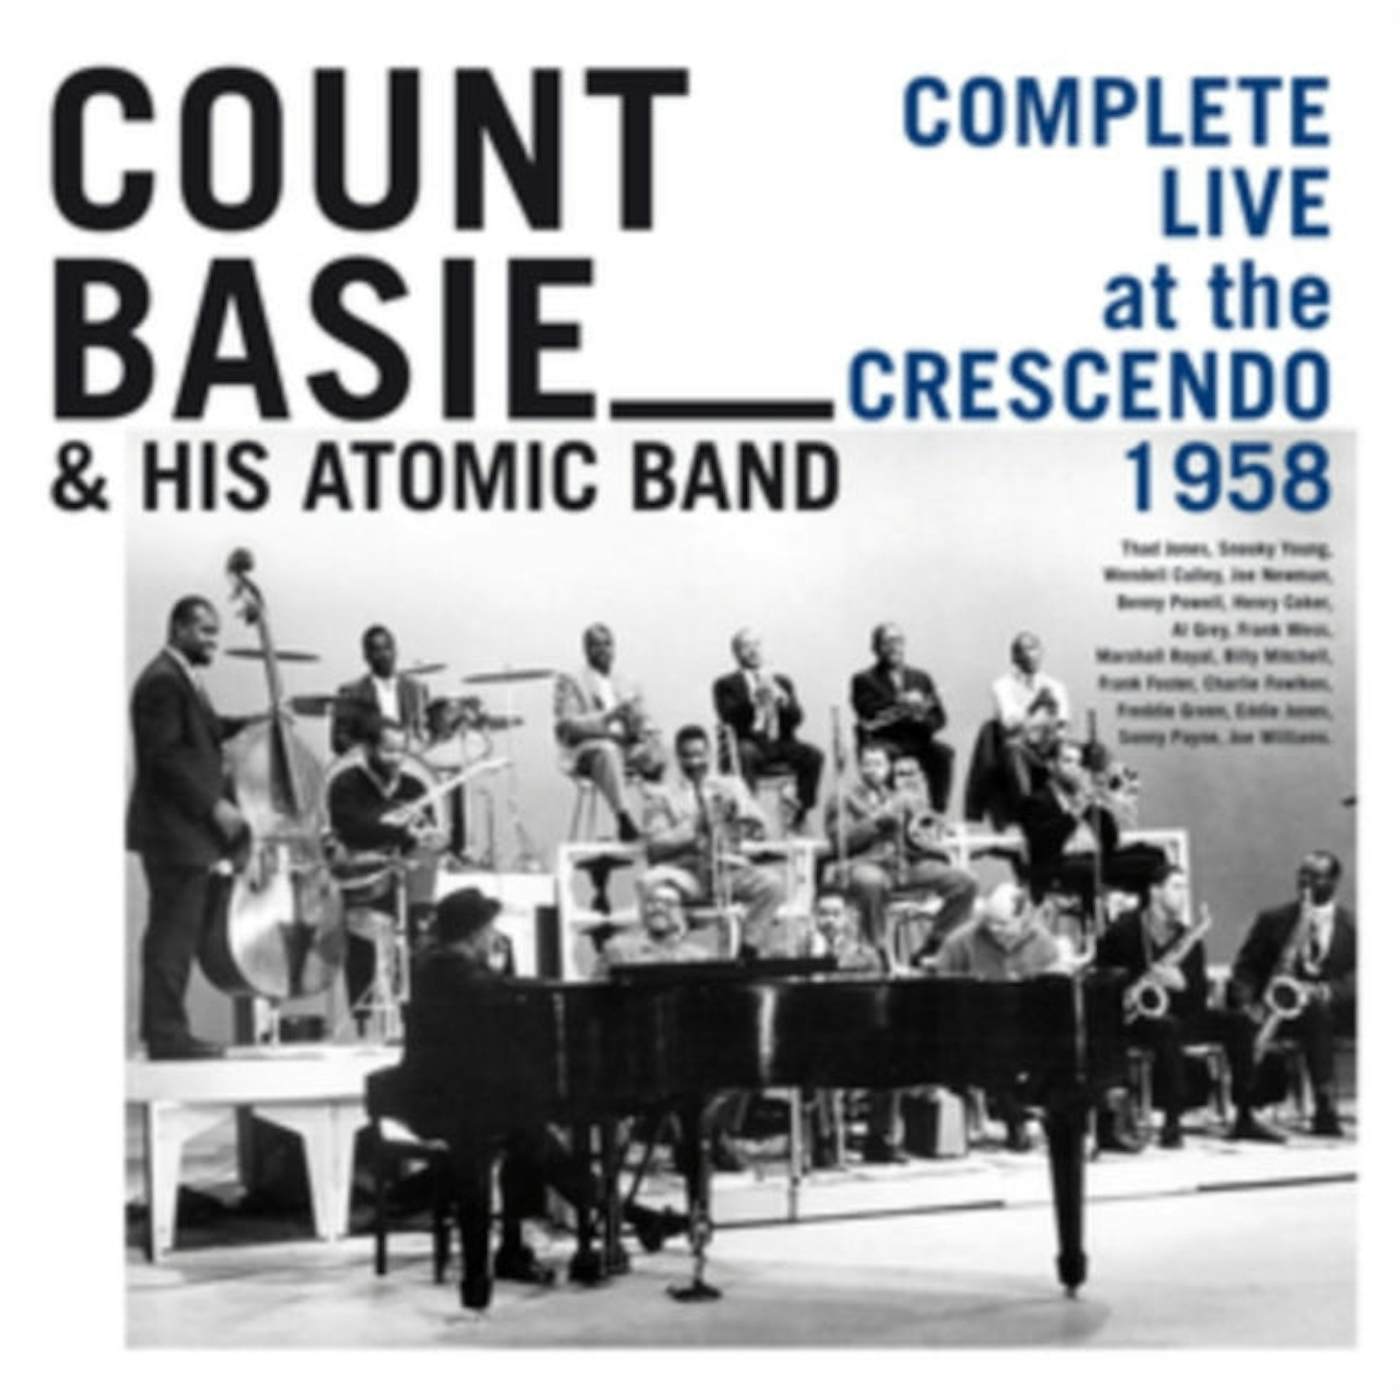 Count Basie & His Atomic Band CD - Complete Live At The Crescendo 19 58 (Deluxe Edition)